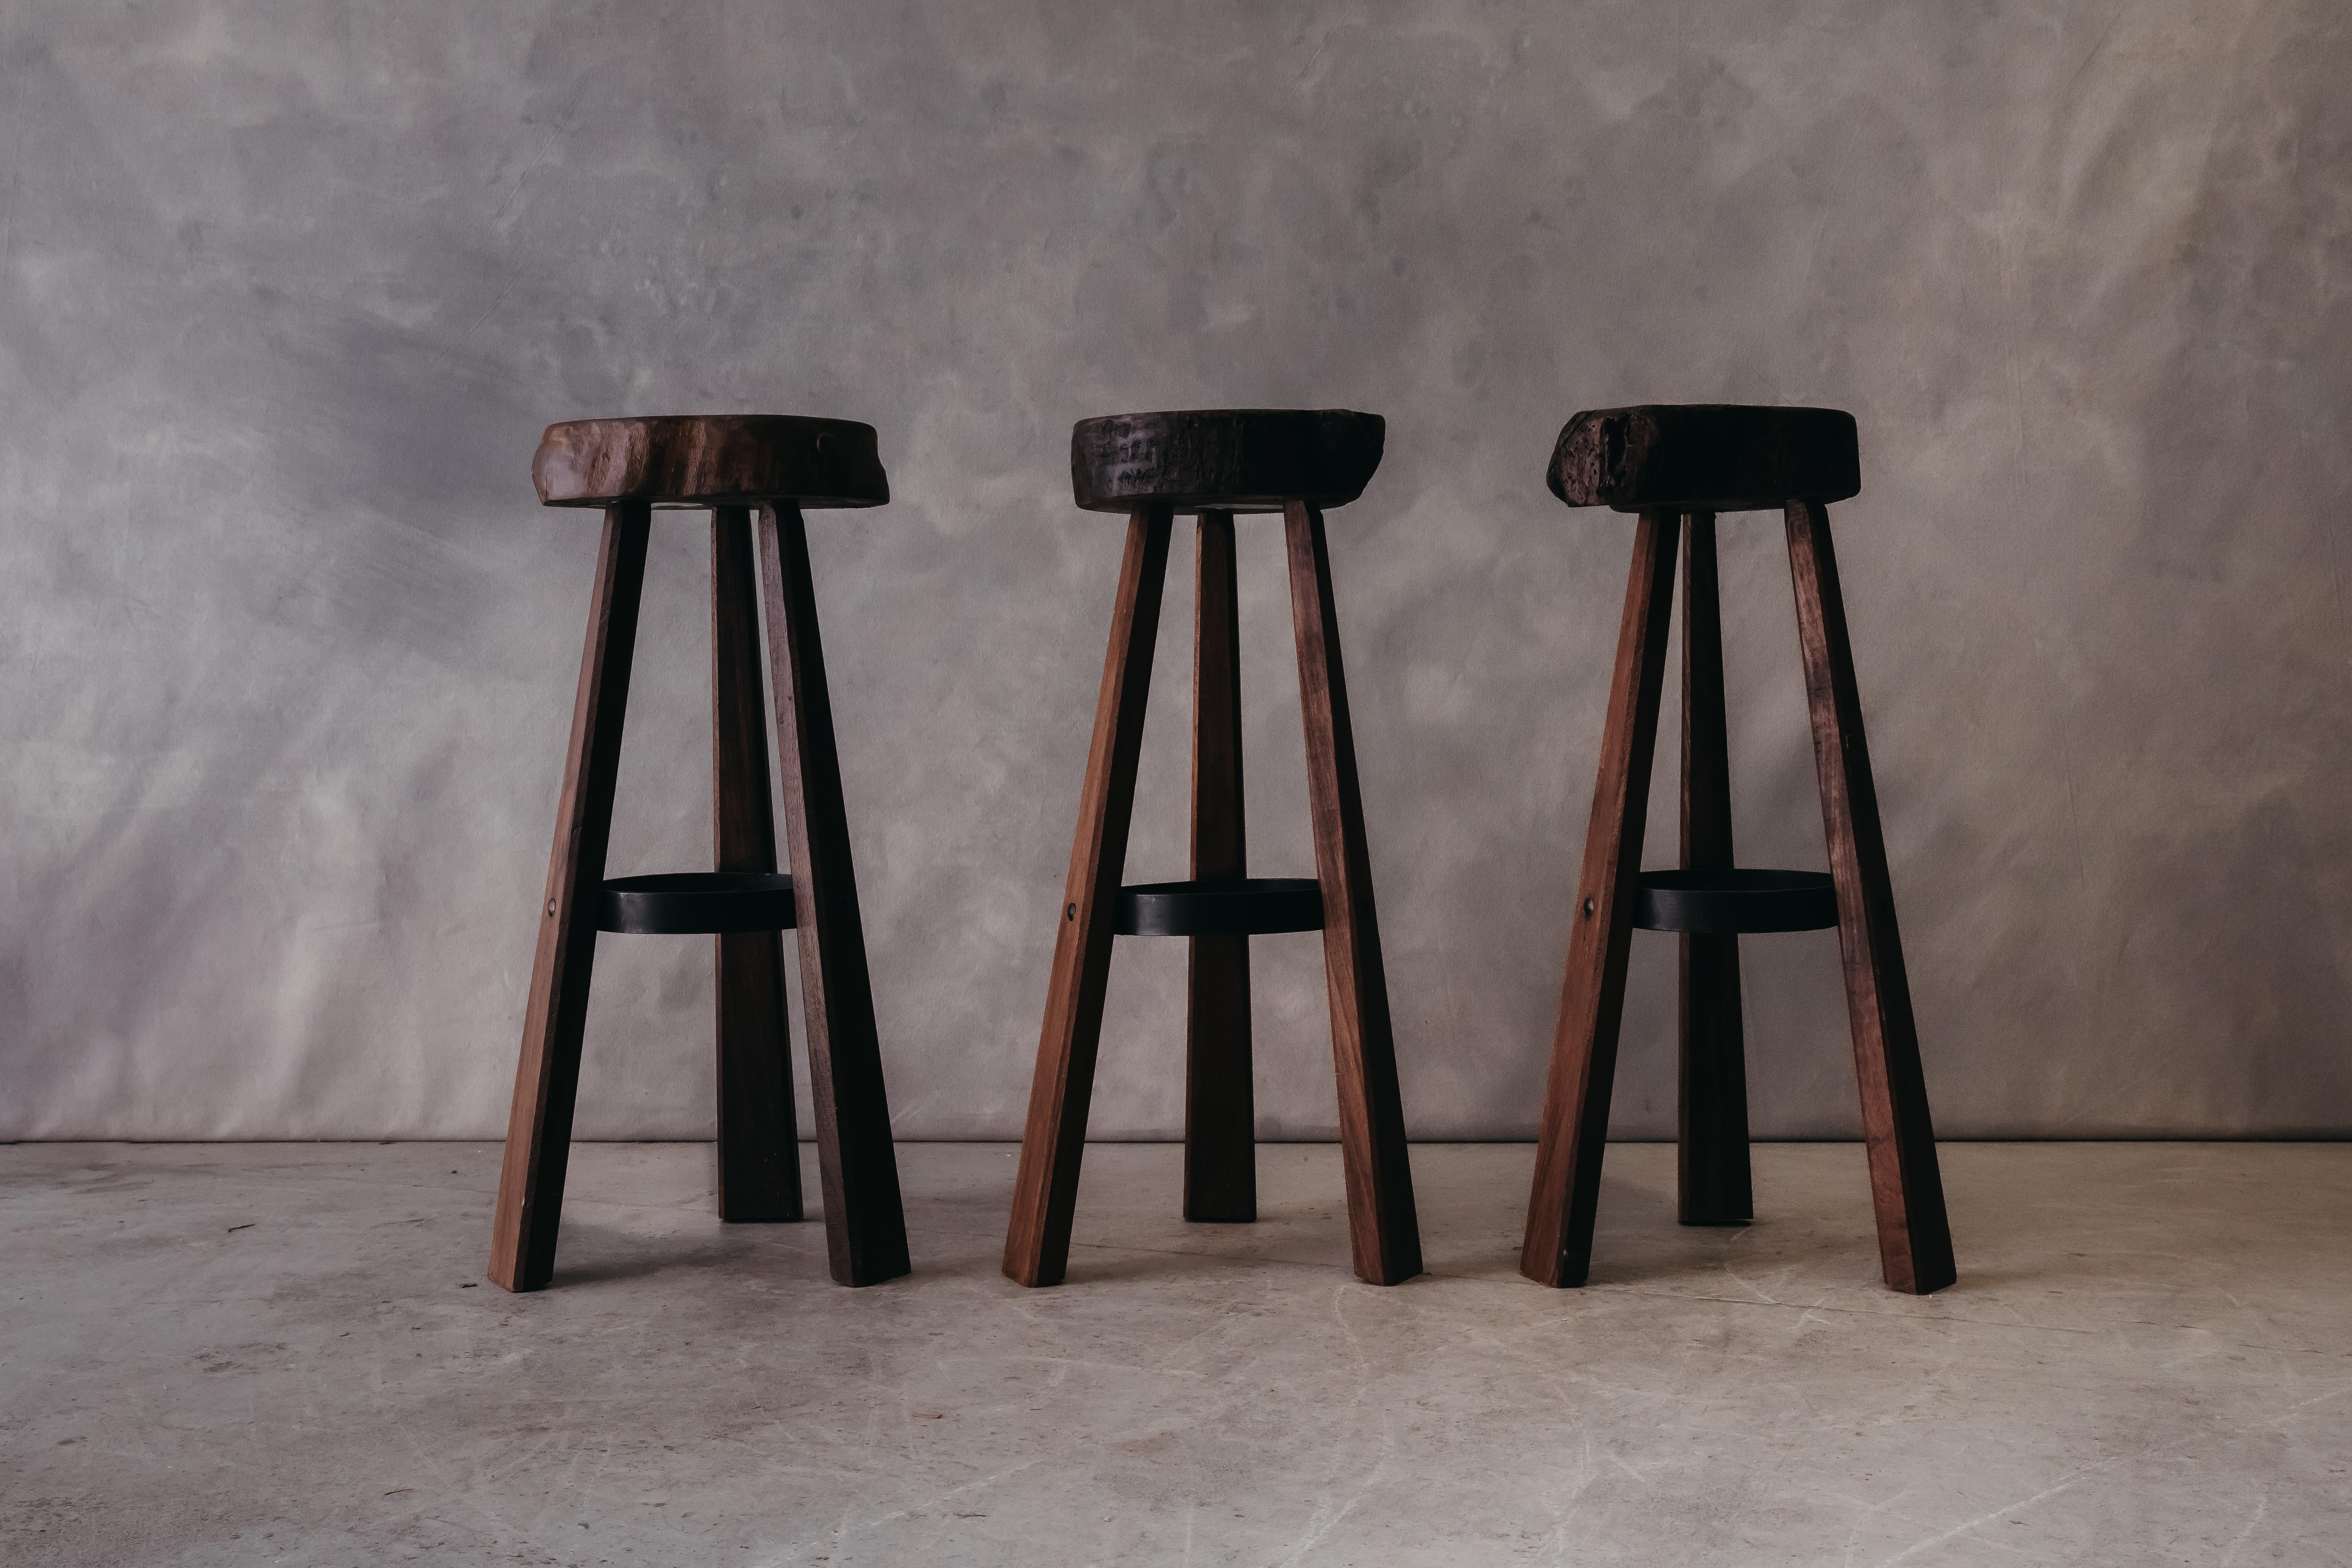 Vintage Set Of Three Brutalist Bar Stools From France, circa 1960. Live edge seats with a circular iron foot rest. Light wear and use.

We prefer to speak directly with our clients. So, If you have any questions or would like to know more please